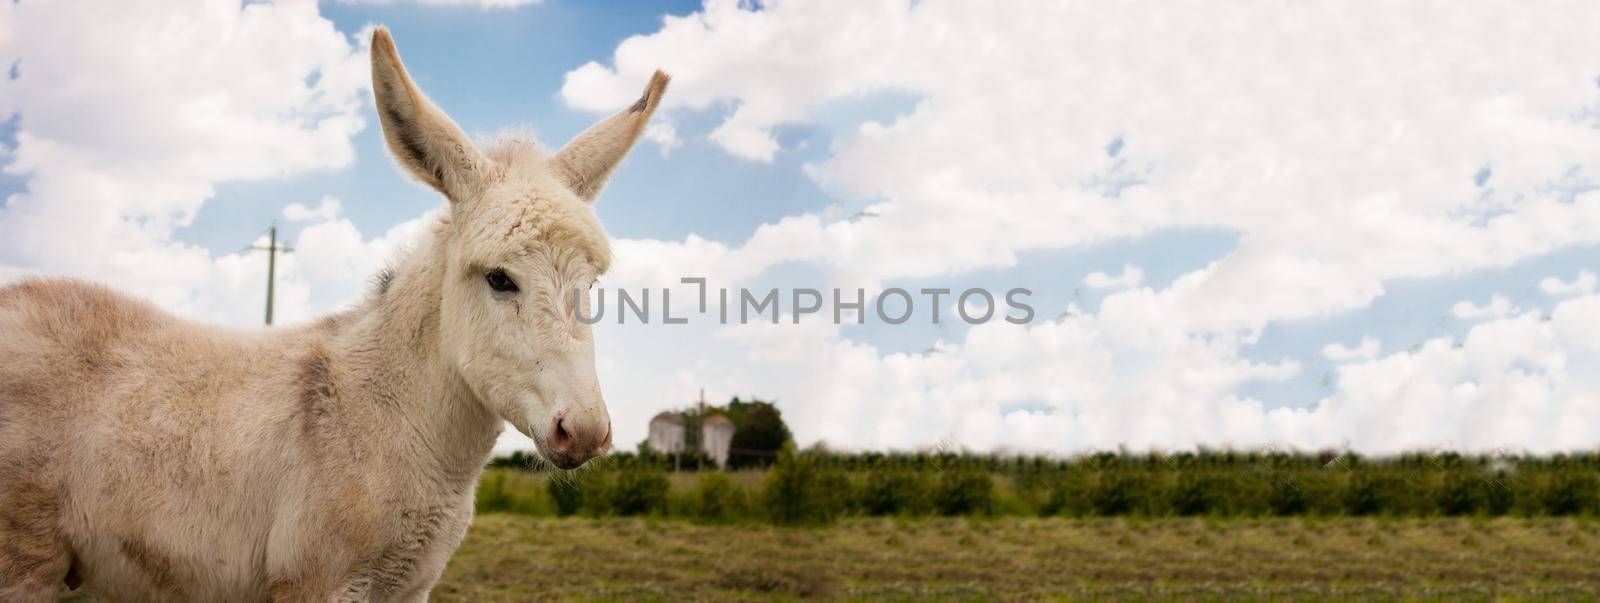 Donkey countryside banner, banner image with copy space